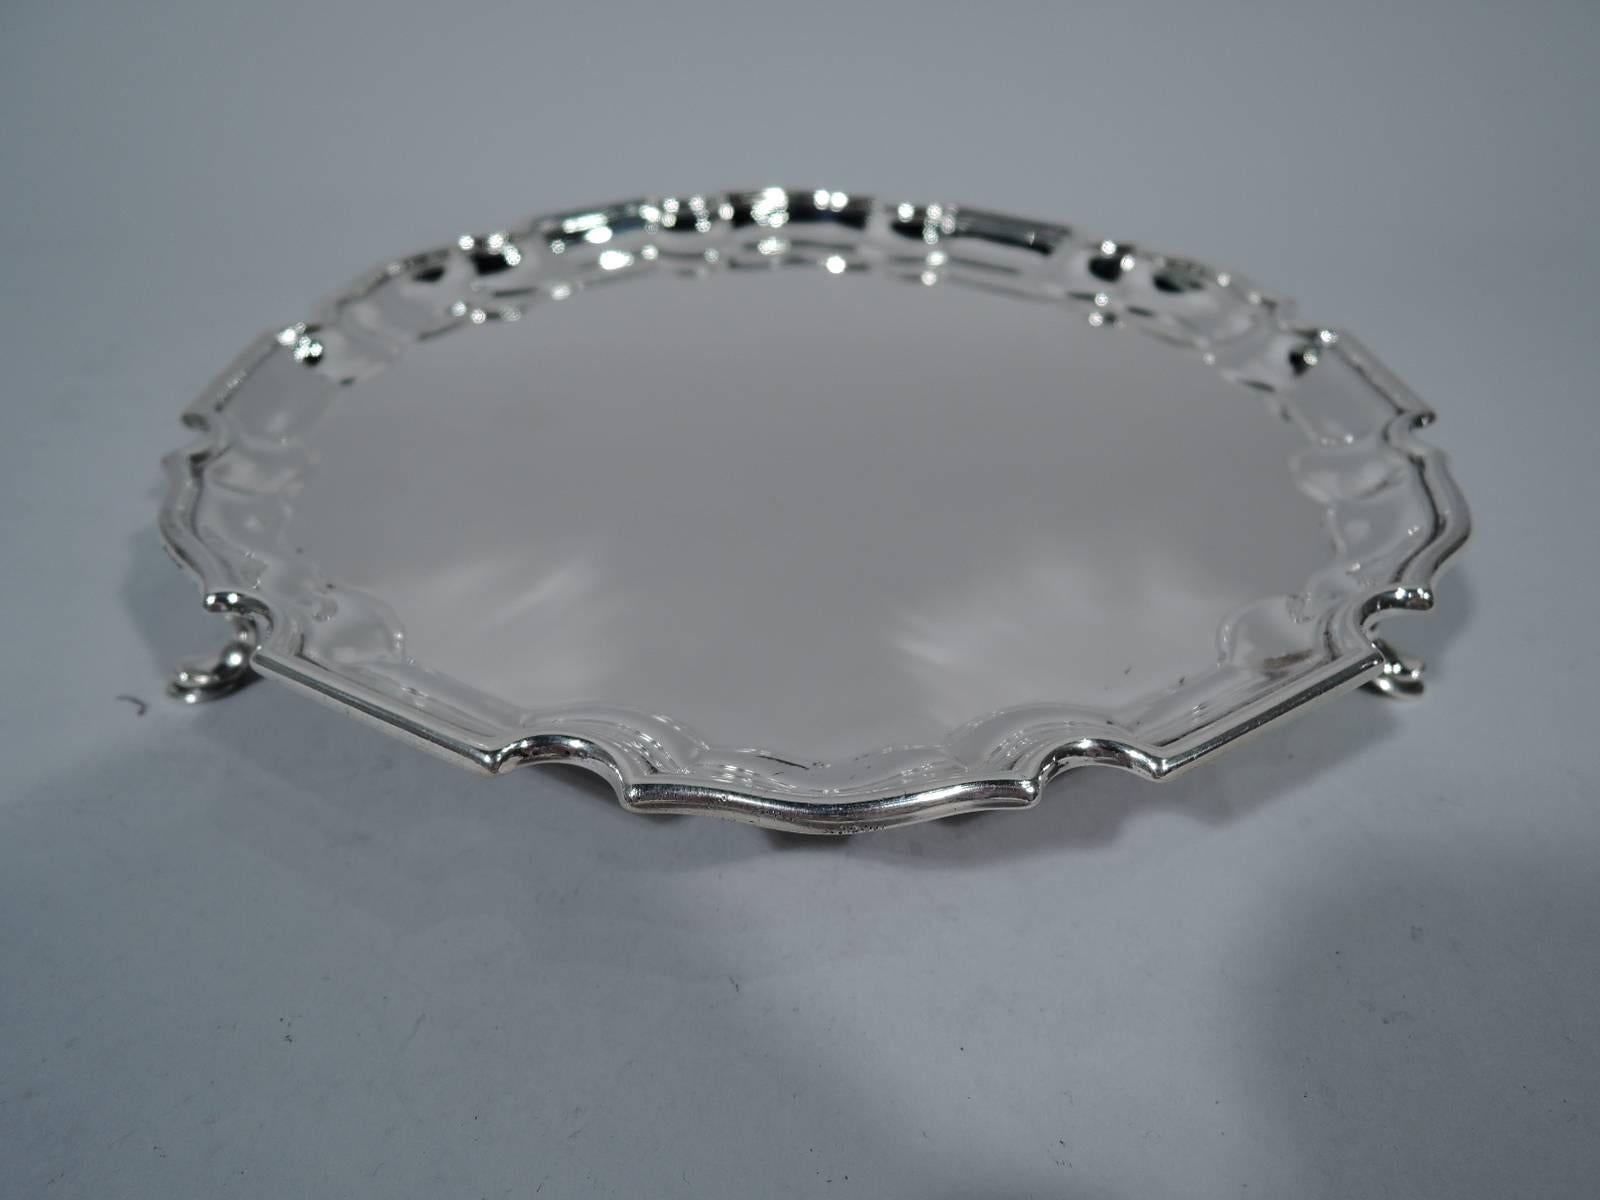 Edwardian Sterling Silver Salver. Made by Goldsmiths & Silversmiths, Ltd in London in 1905. Circular with molded curvilinear piecrust rim. Rests on 3 padded c-scrolls. Sweet Georgian revival. Hallmarked. Weight: 9.5 troy ounces.